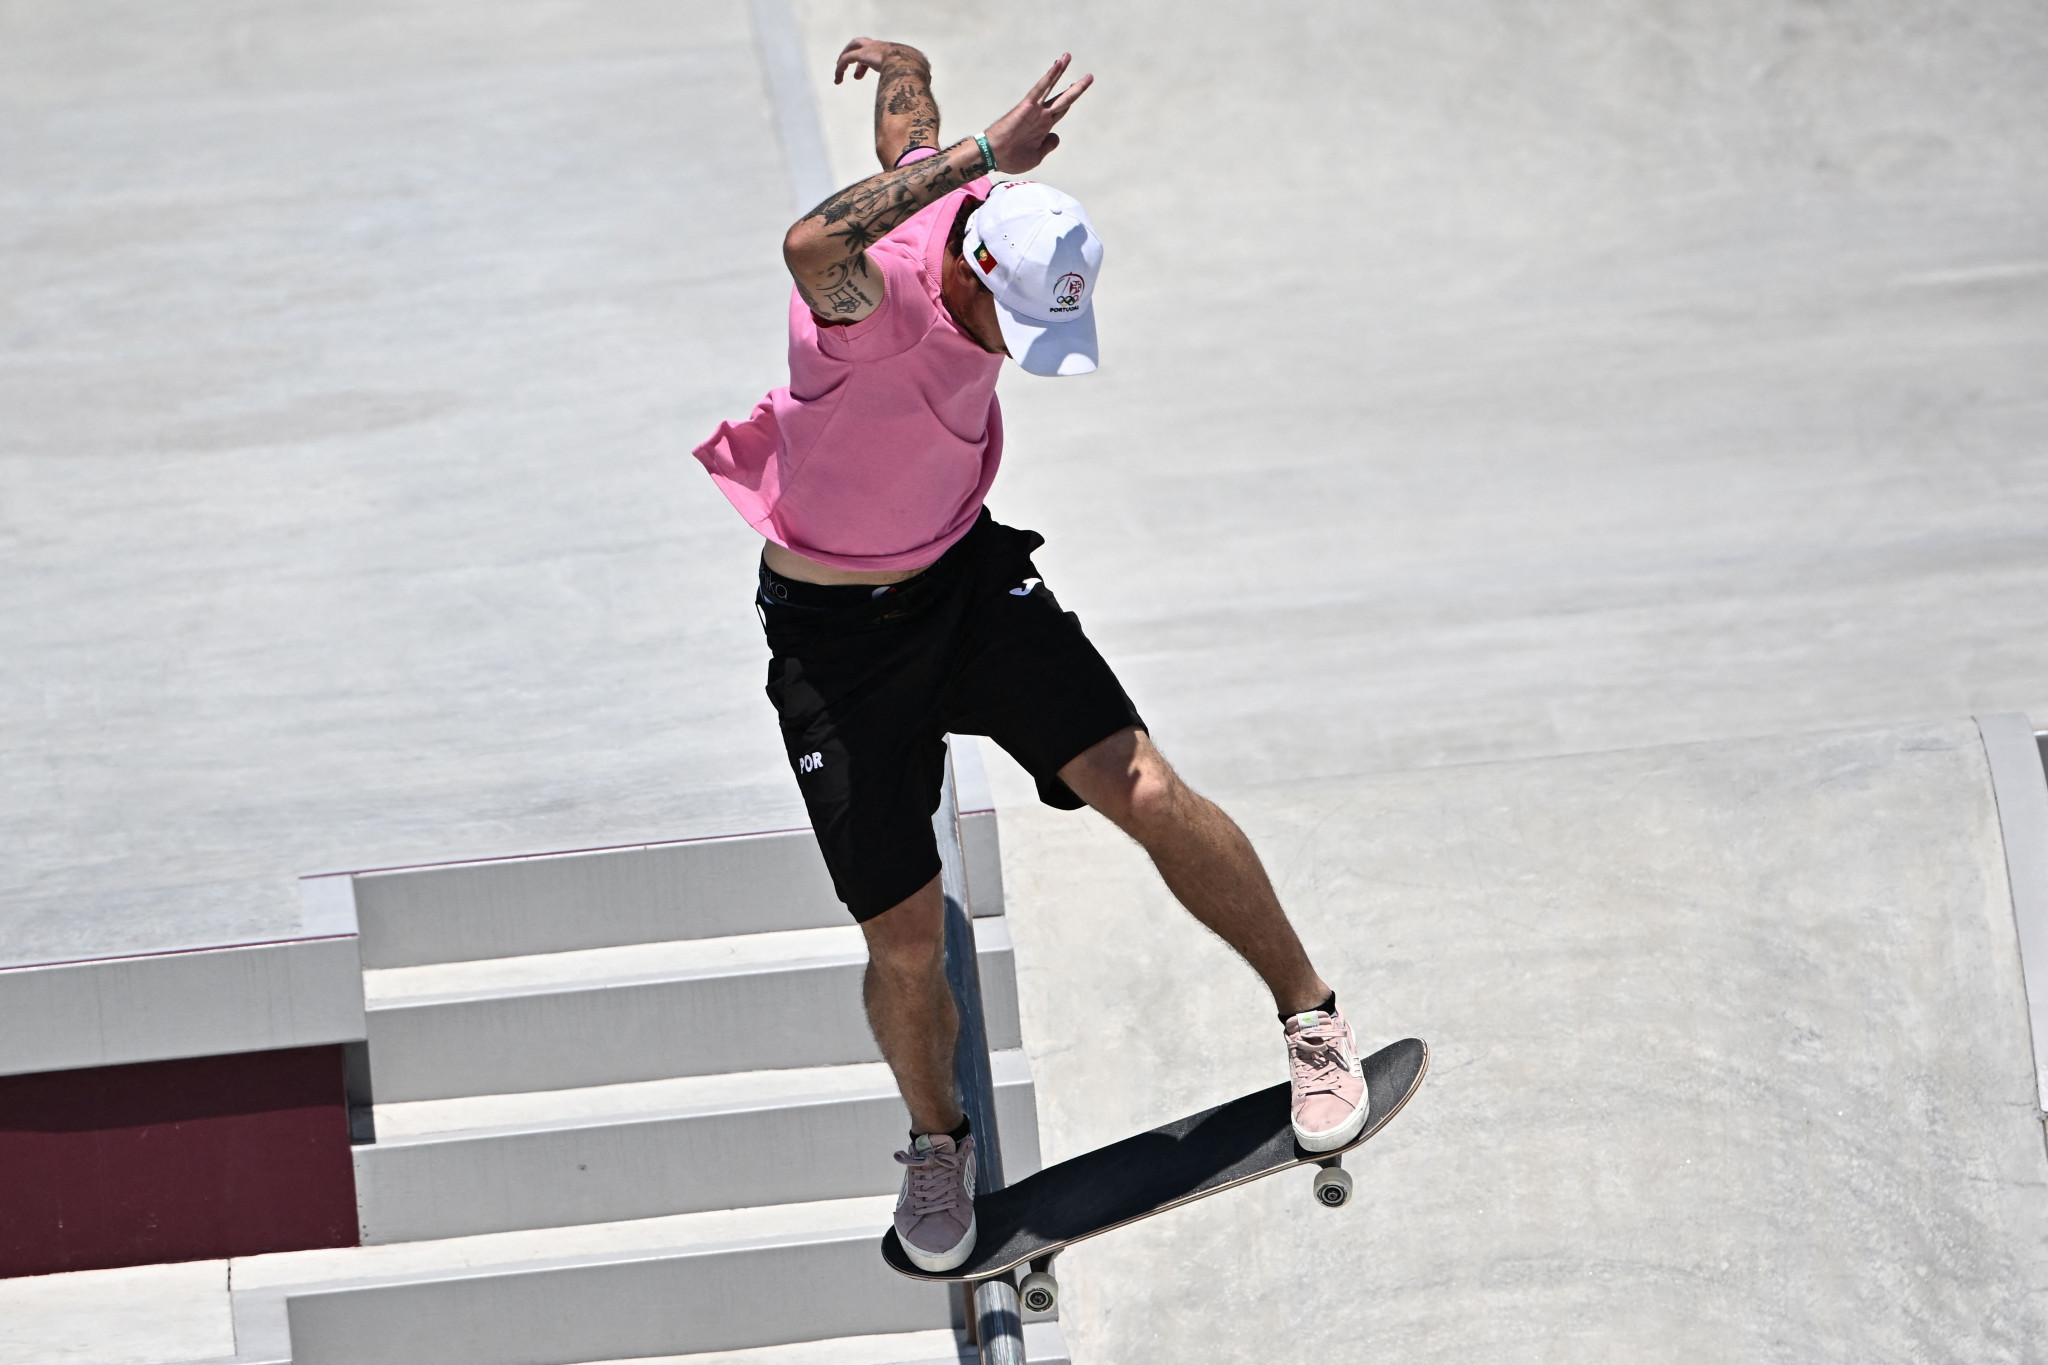 Ribeiro and Leal take to Lake Havasu to defend leads in Street League Skateboarding Championships Tour 